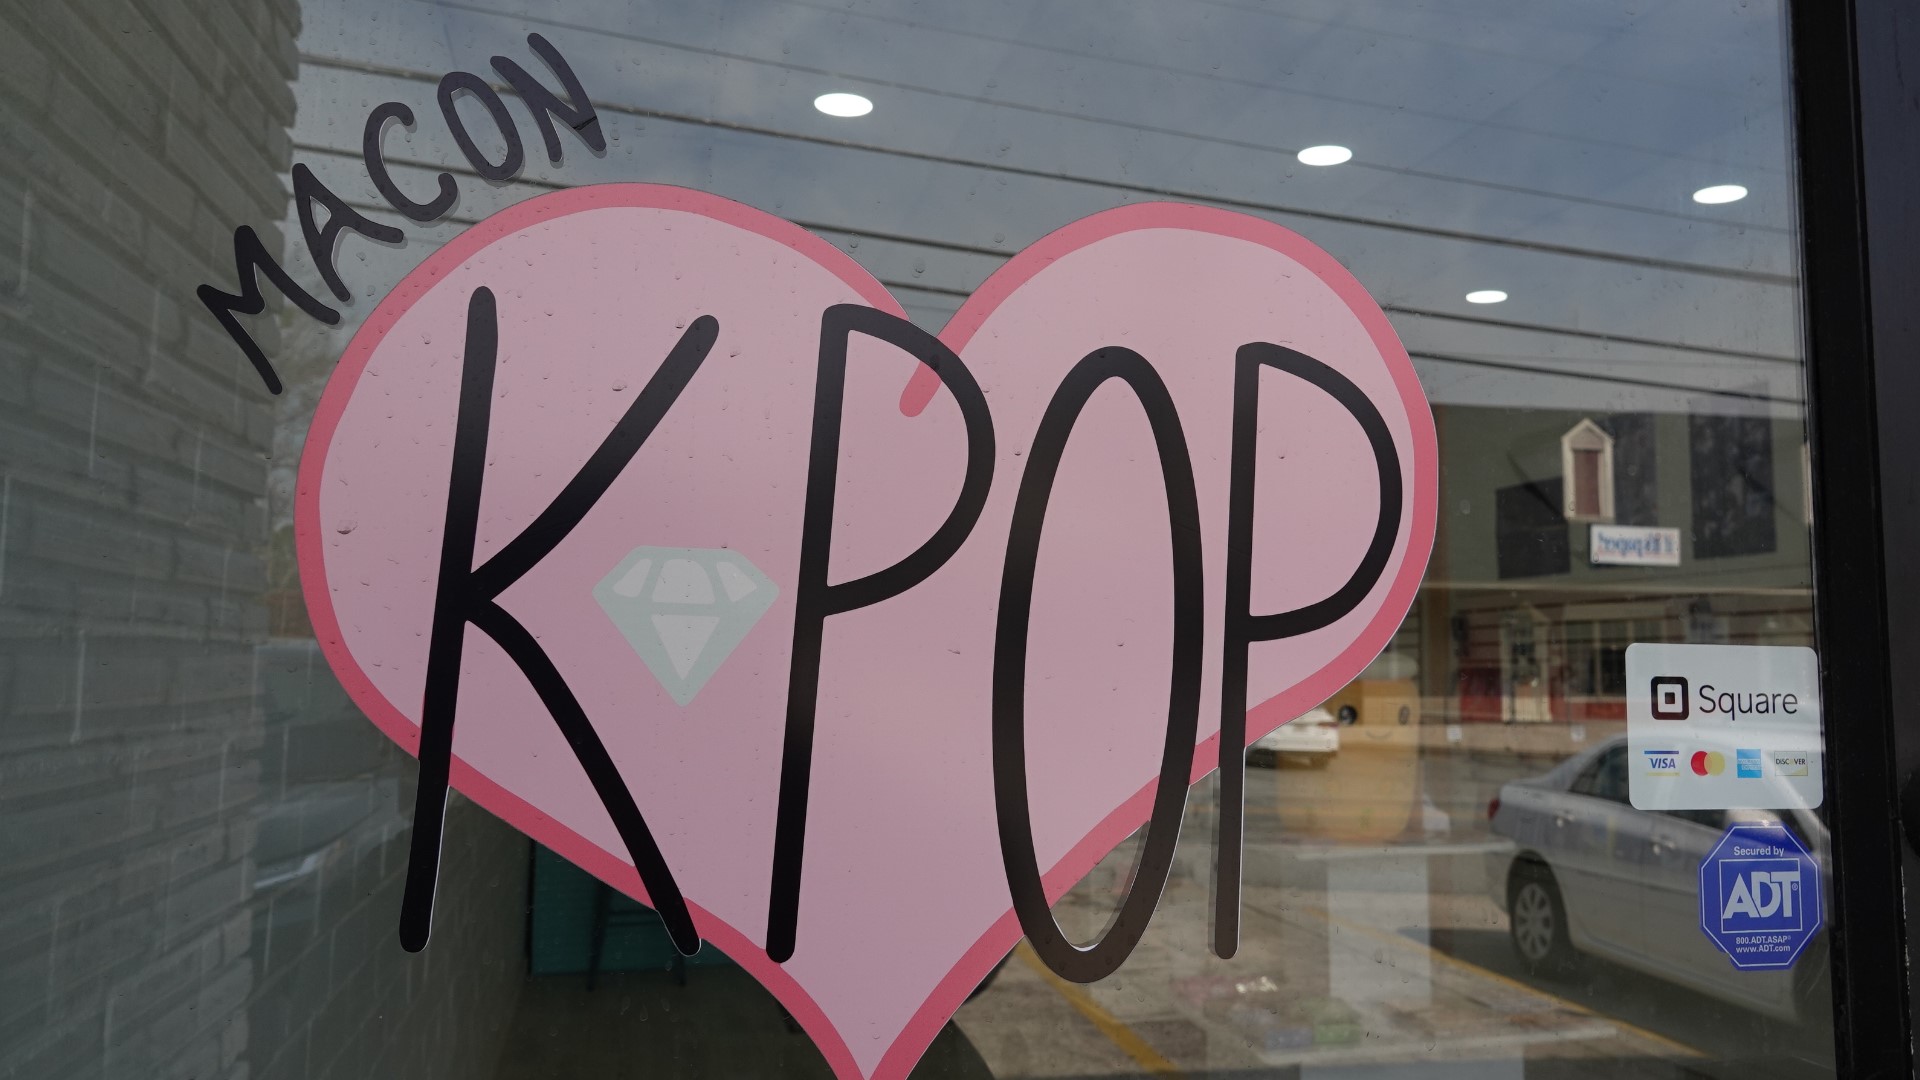 17-year-old owner Chase Kiernan said when friends were considering future careers, they weren't sure what they wanted to do but they knew they loved K-Pop.